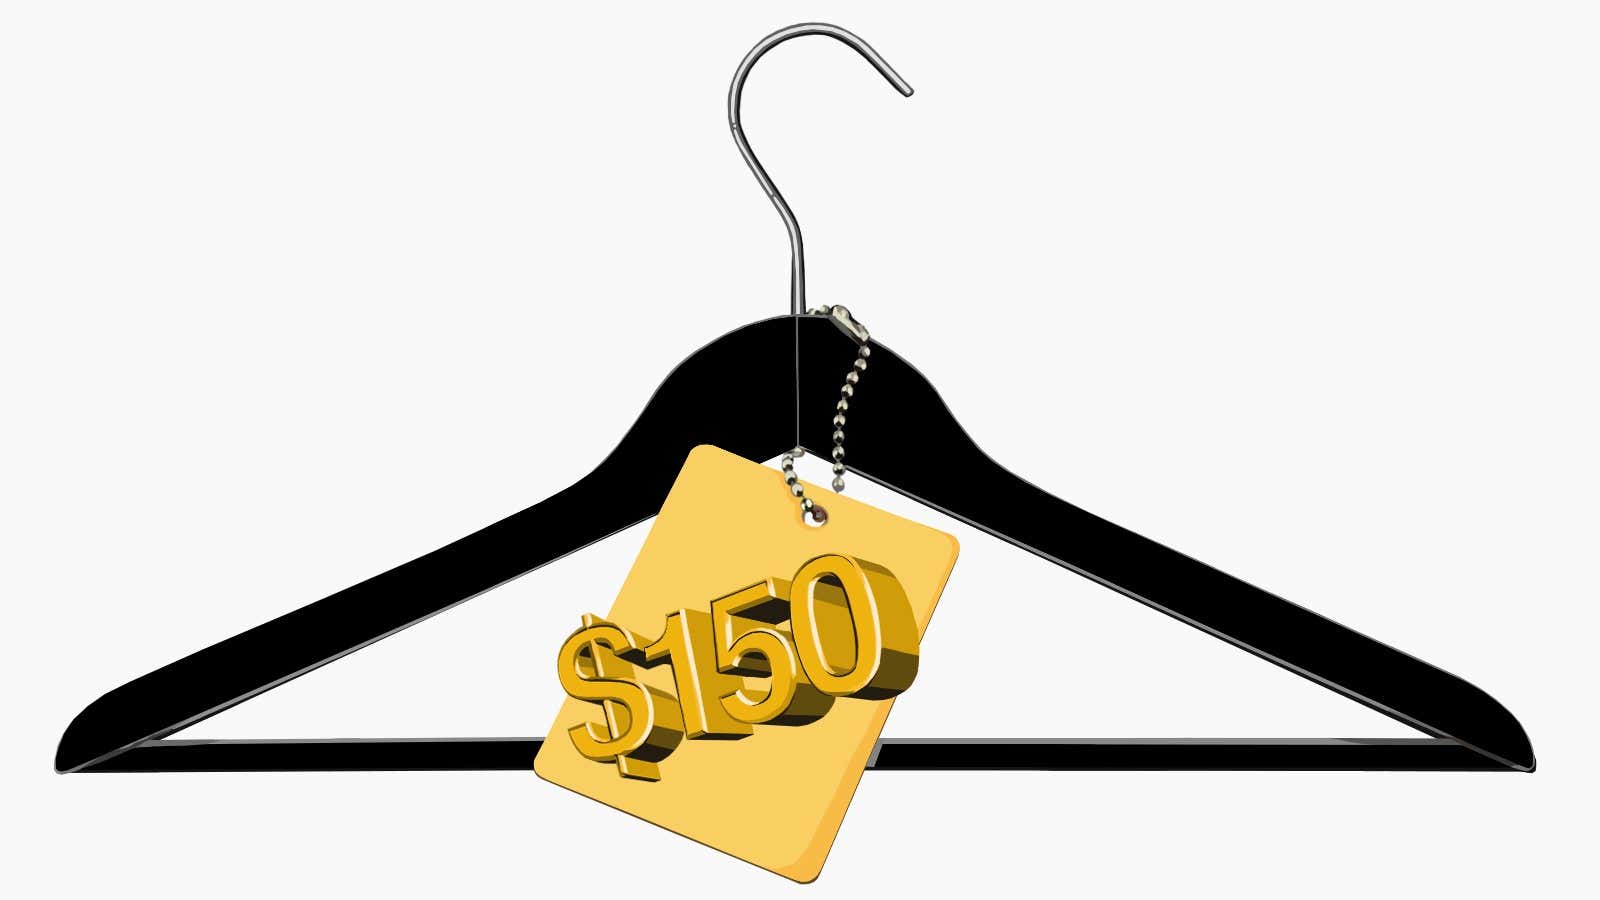 Your next item of clothing should be so expensive it hurts